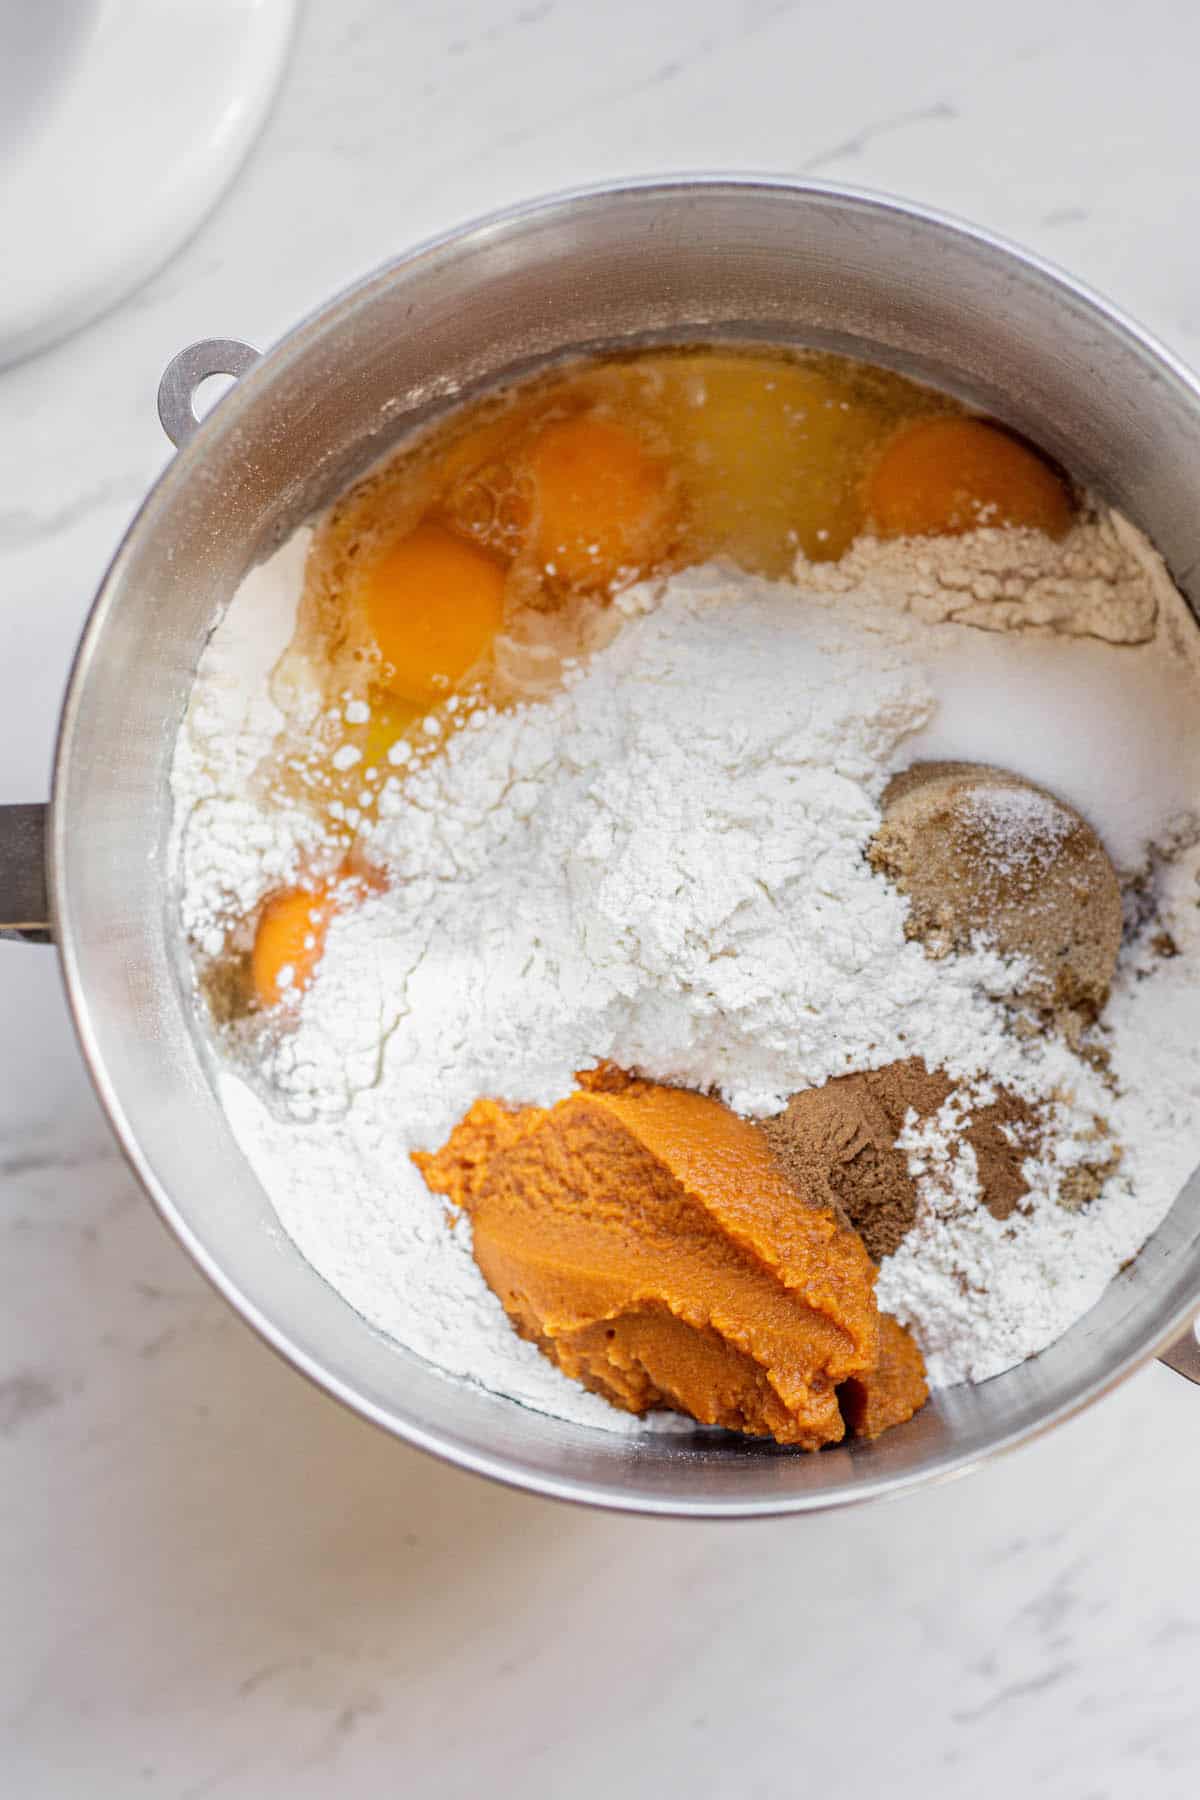 A stainless steel mixing bowl containing ingredients for pumpkin dough: raw eggs, flour, sugar, spices, and a scoop of vibrant pumpkin puree on a white marble surface.